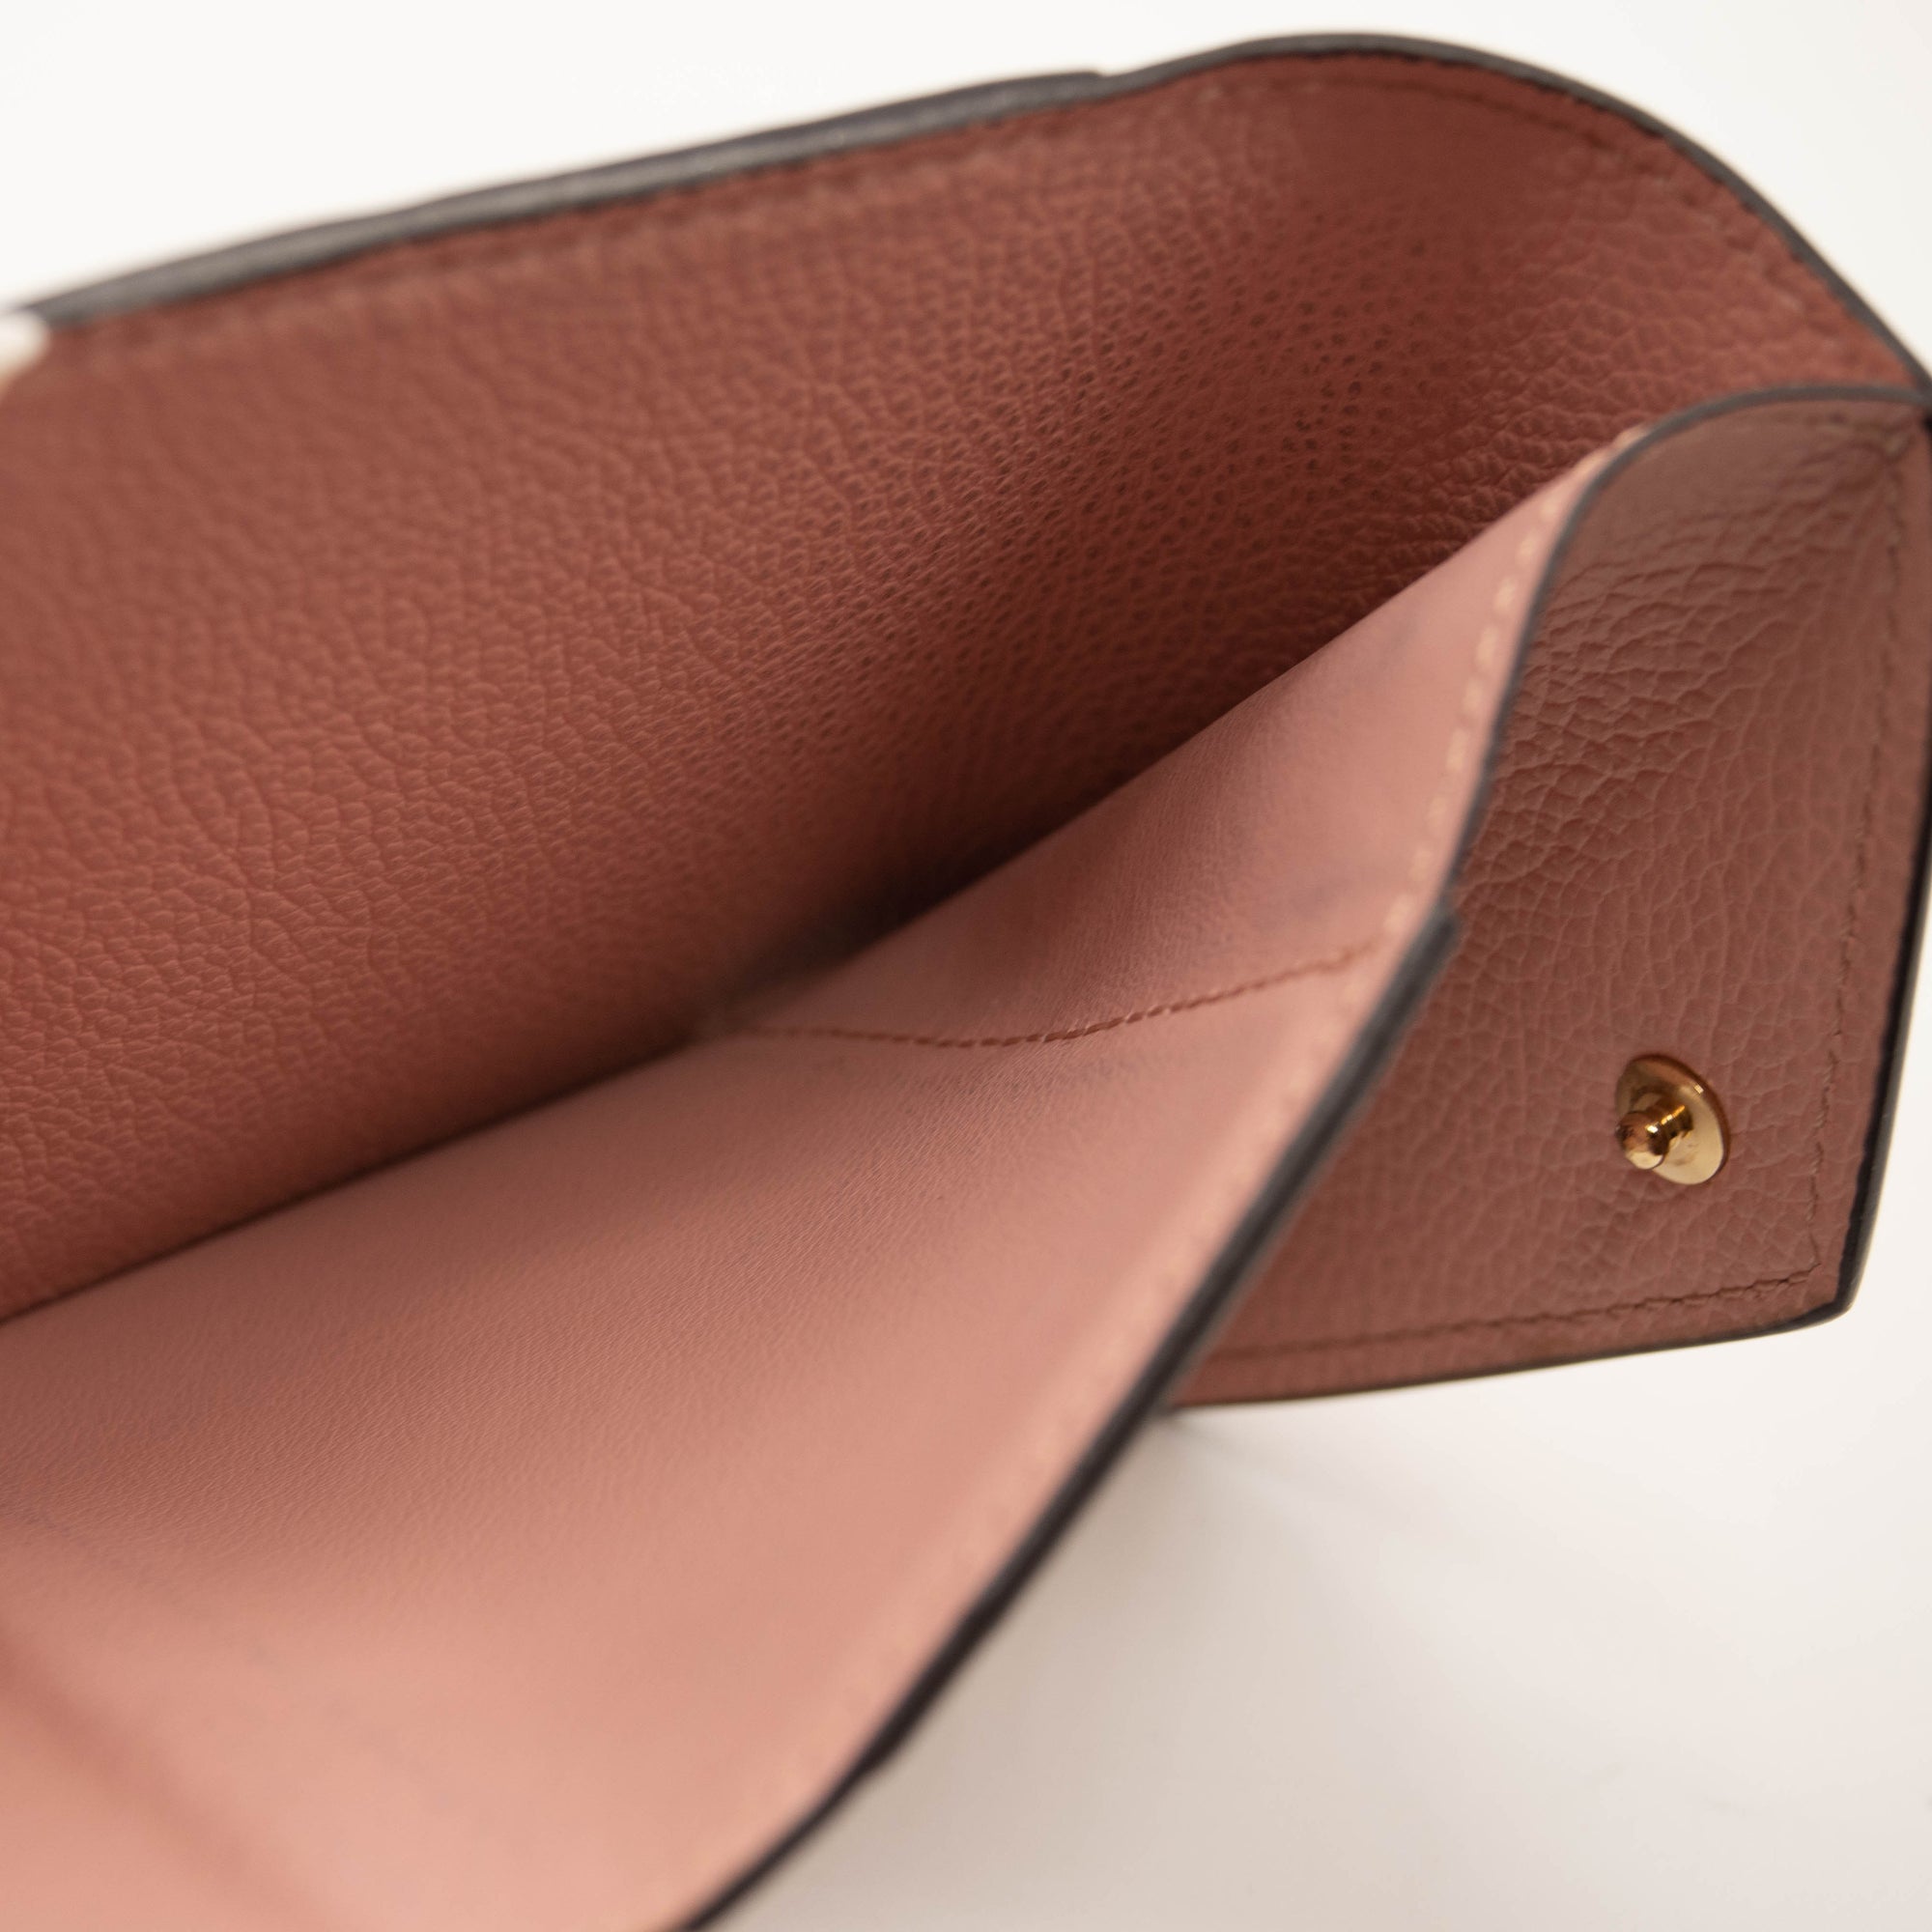 Review of the Louis Vuitton Zoe Wallet in Rose Poudre Empreinte Leather 